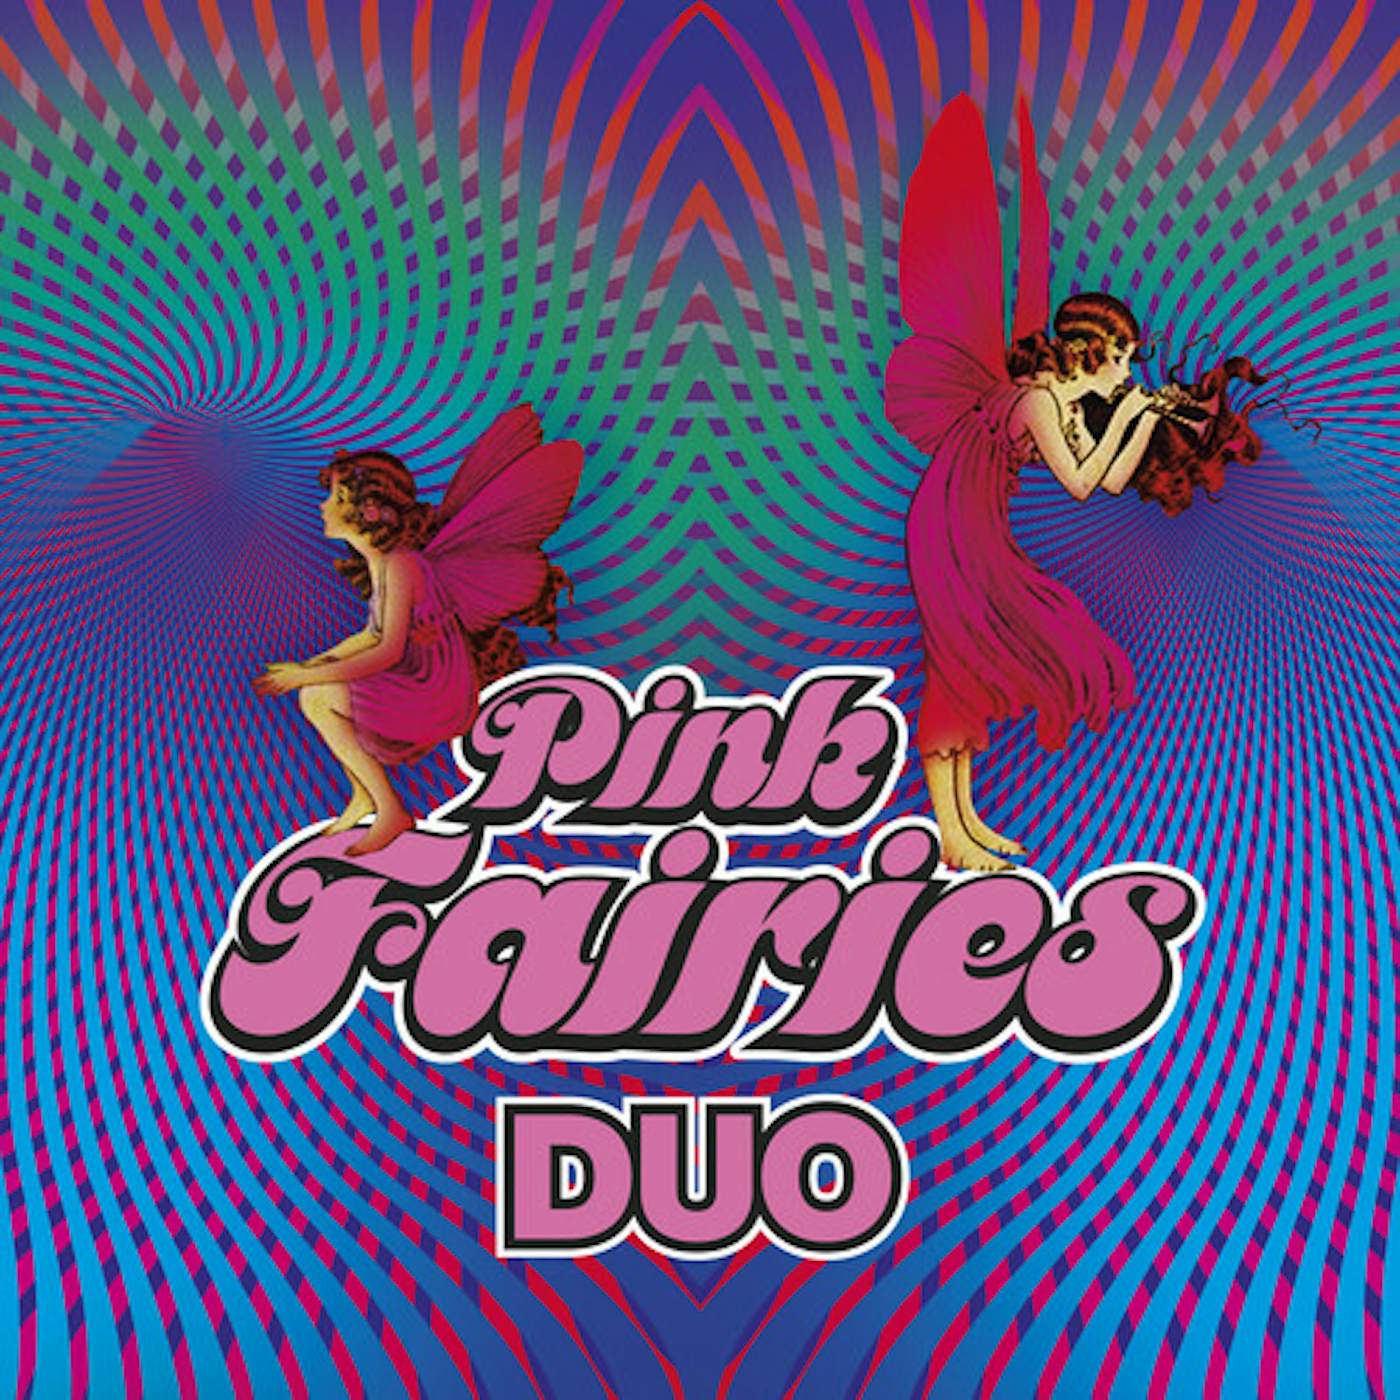 The Pink Fairies DUO CD